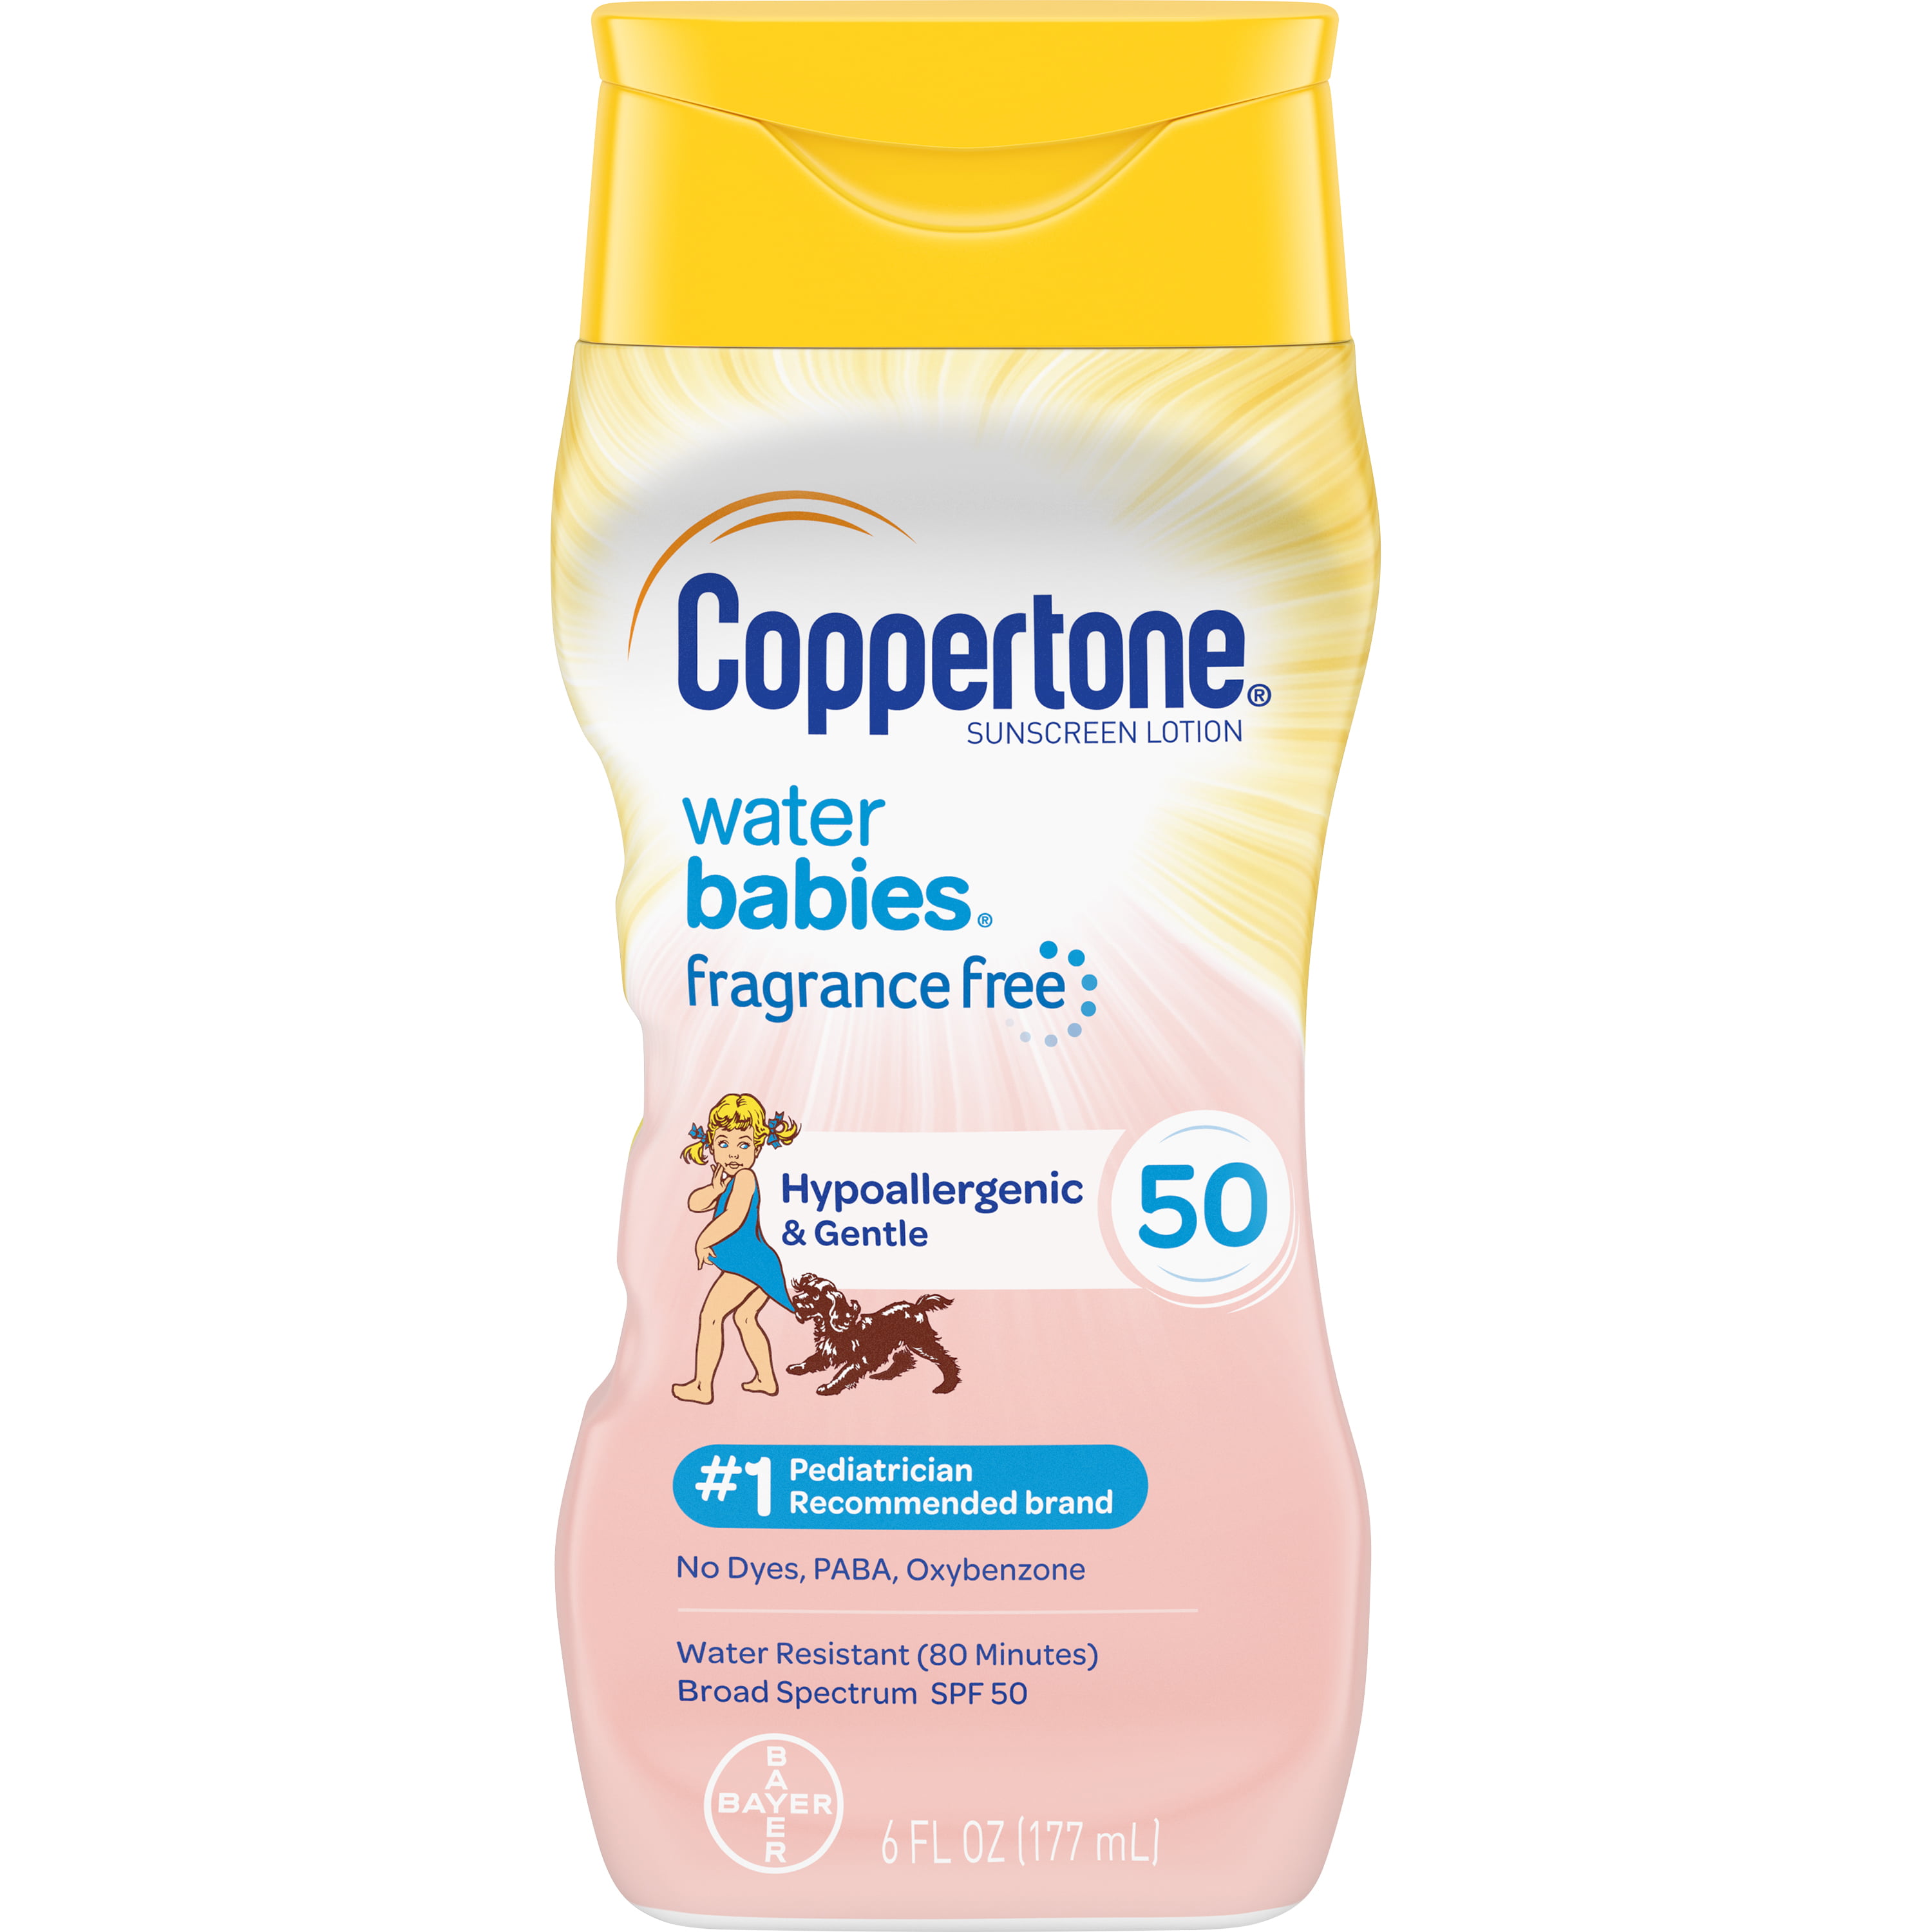 Coppertone WaterBABIES Sunscreen Fragrance Free Lotion SPF ...